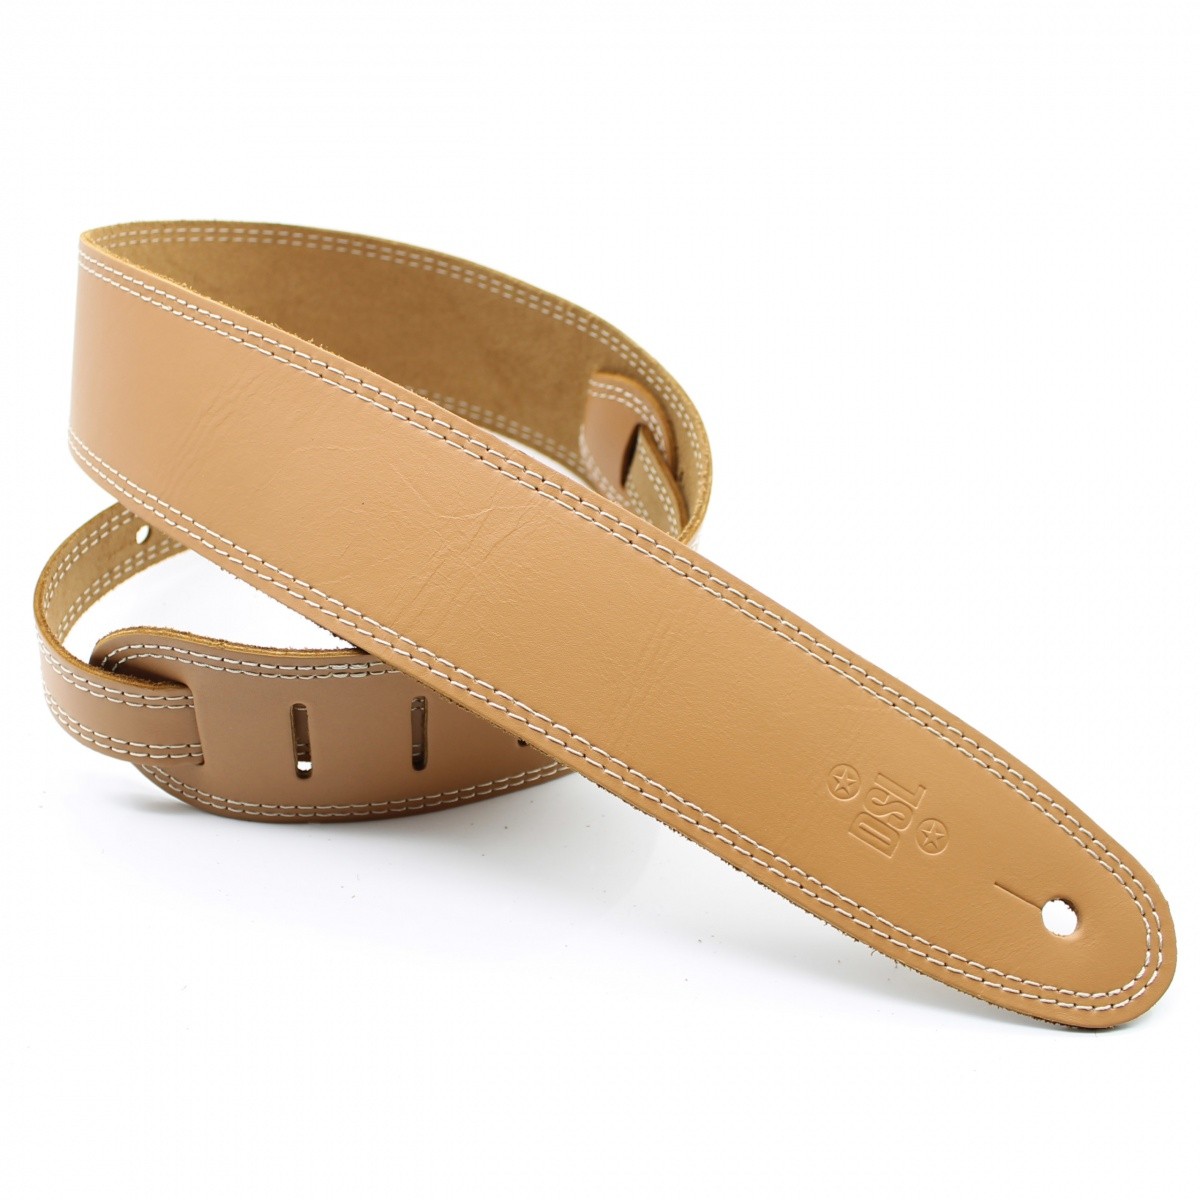 DSL 2.5'' Single Ply Leather Tan with Beige Stitch Guitar Strap SGE25-18-3